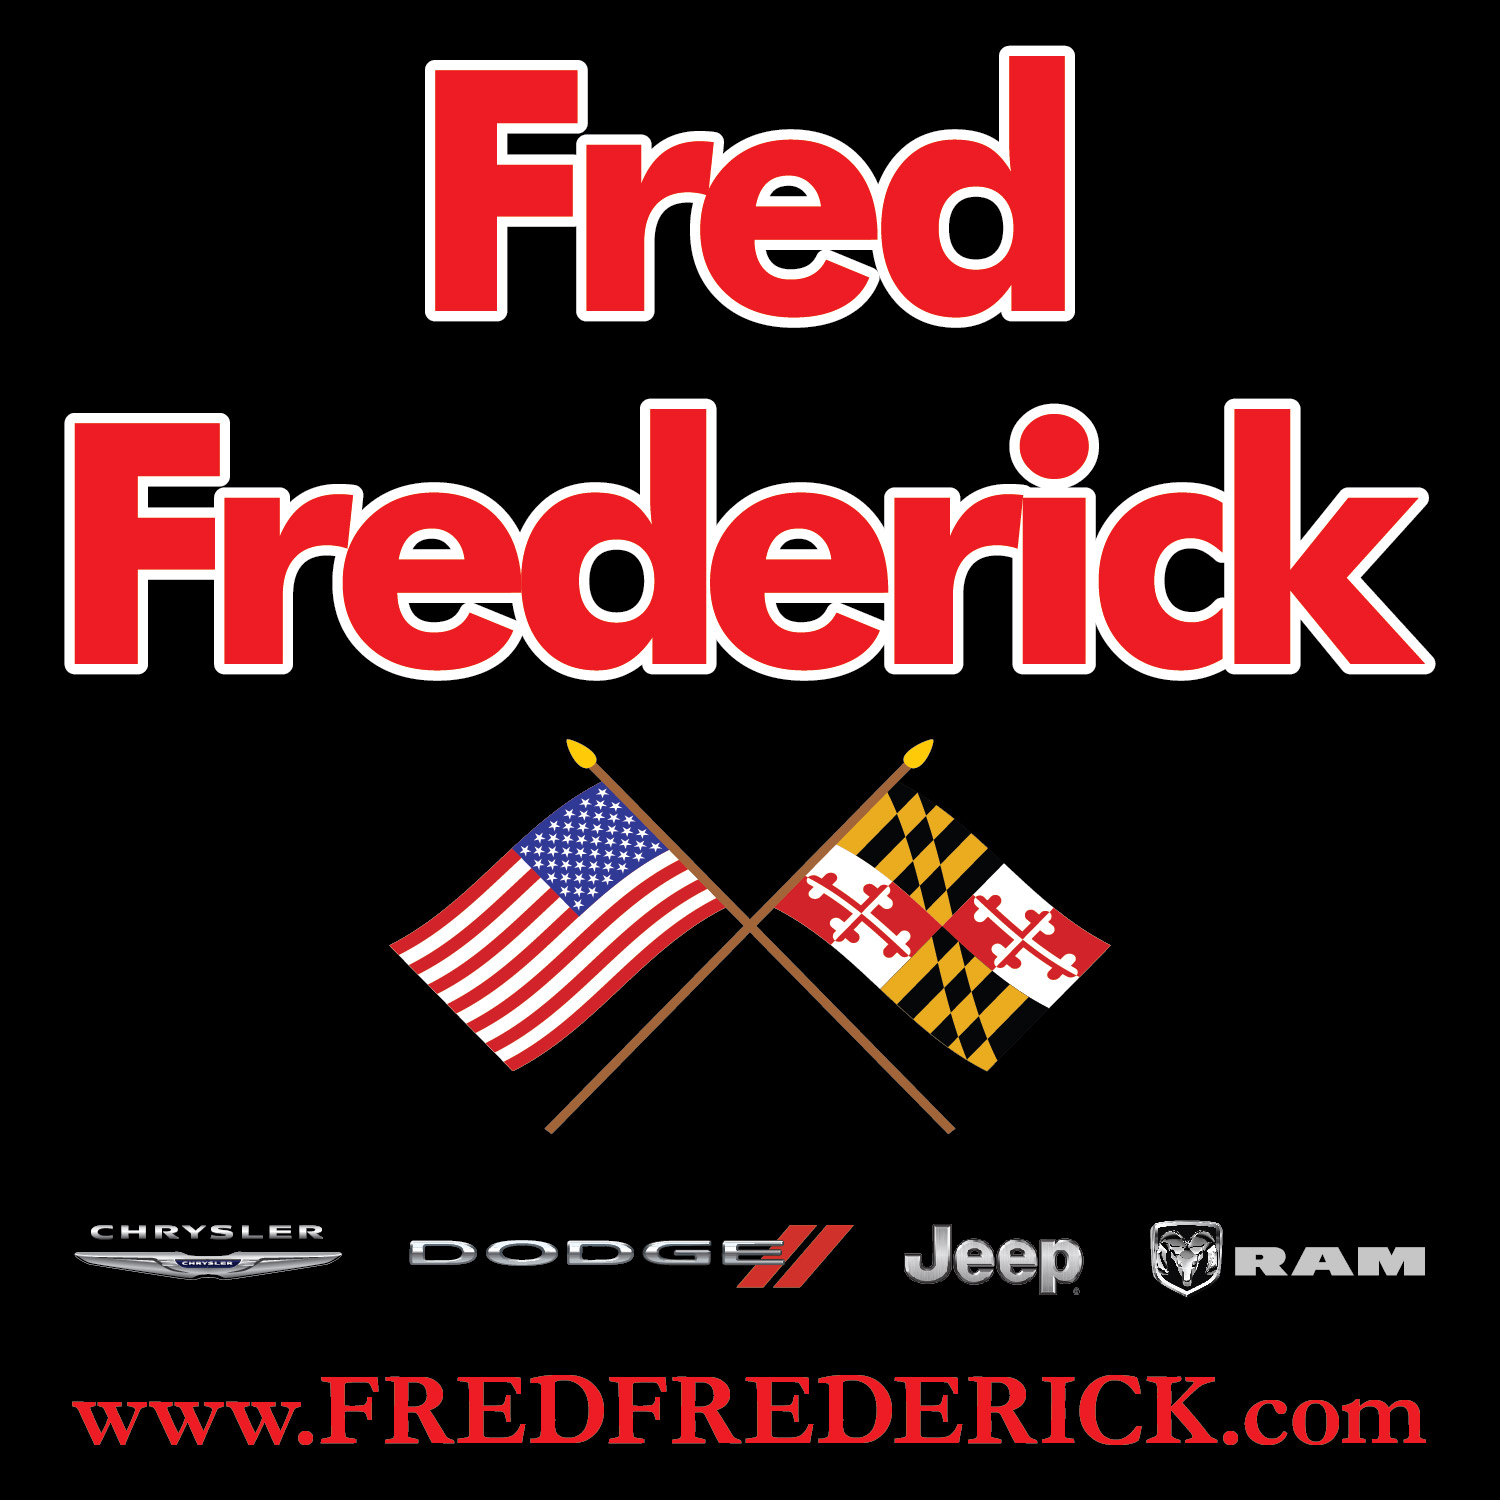 Fred Frederick